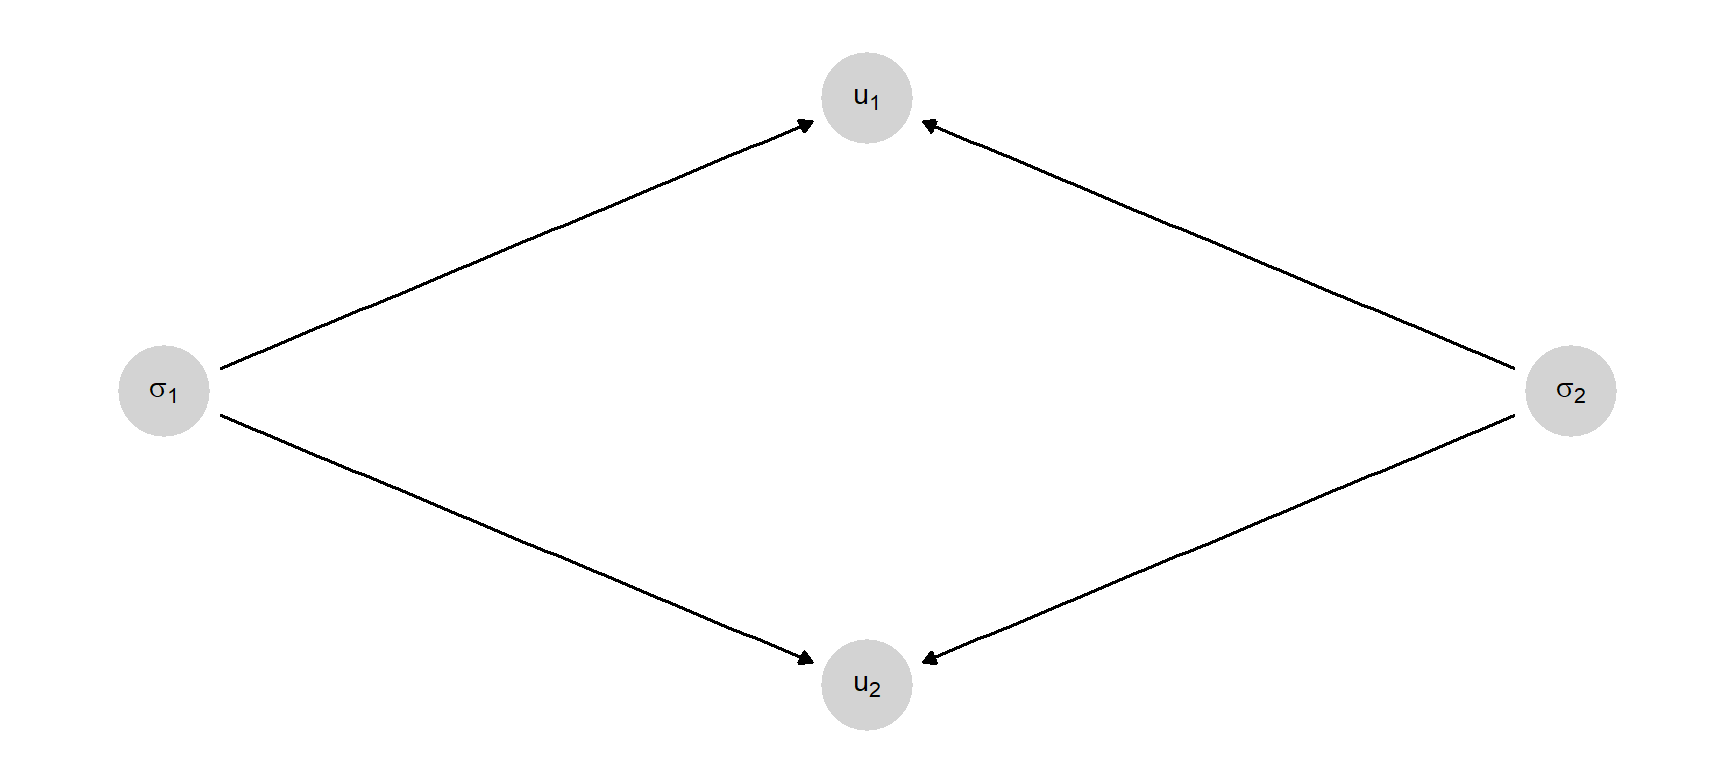 Formal structure of a normal form game.